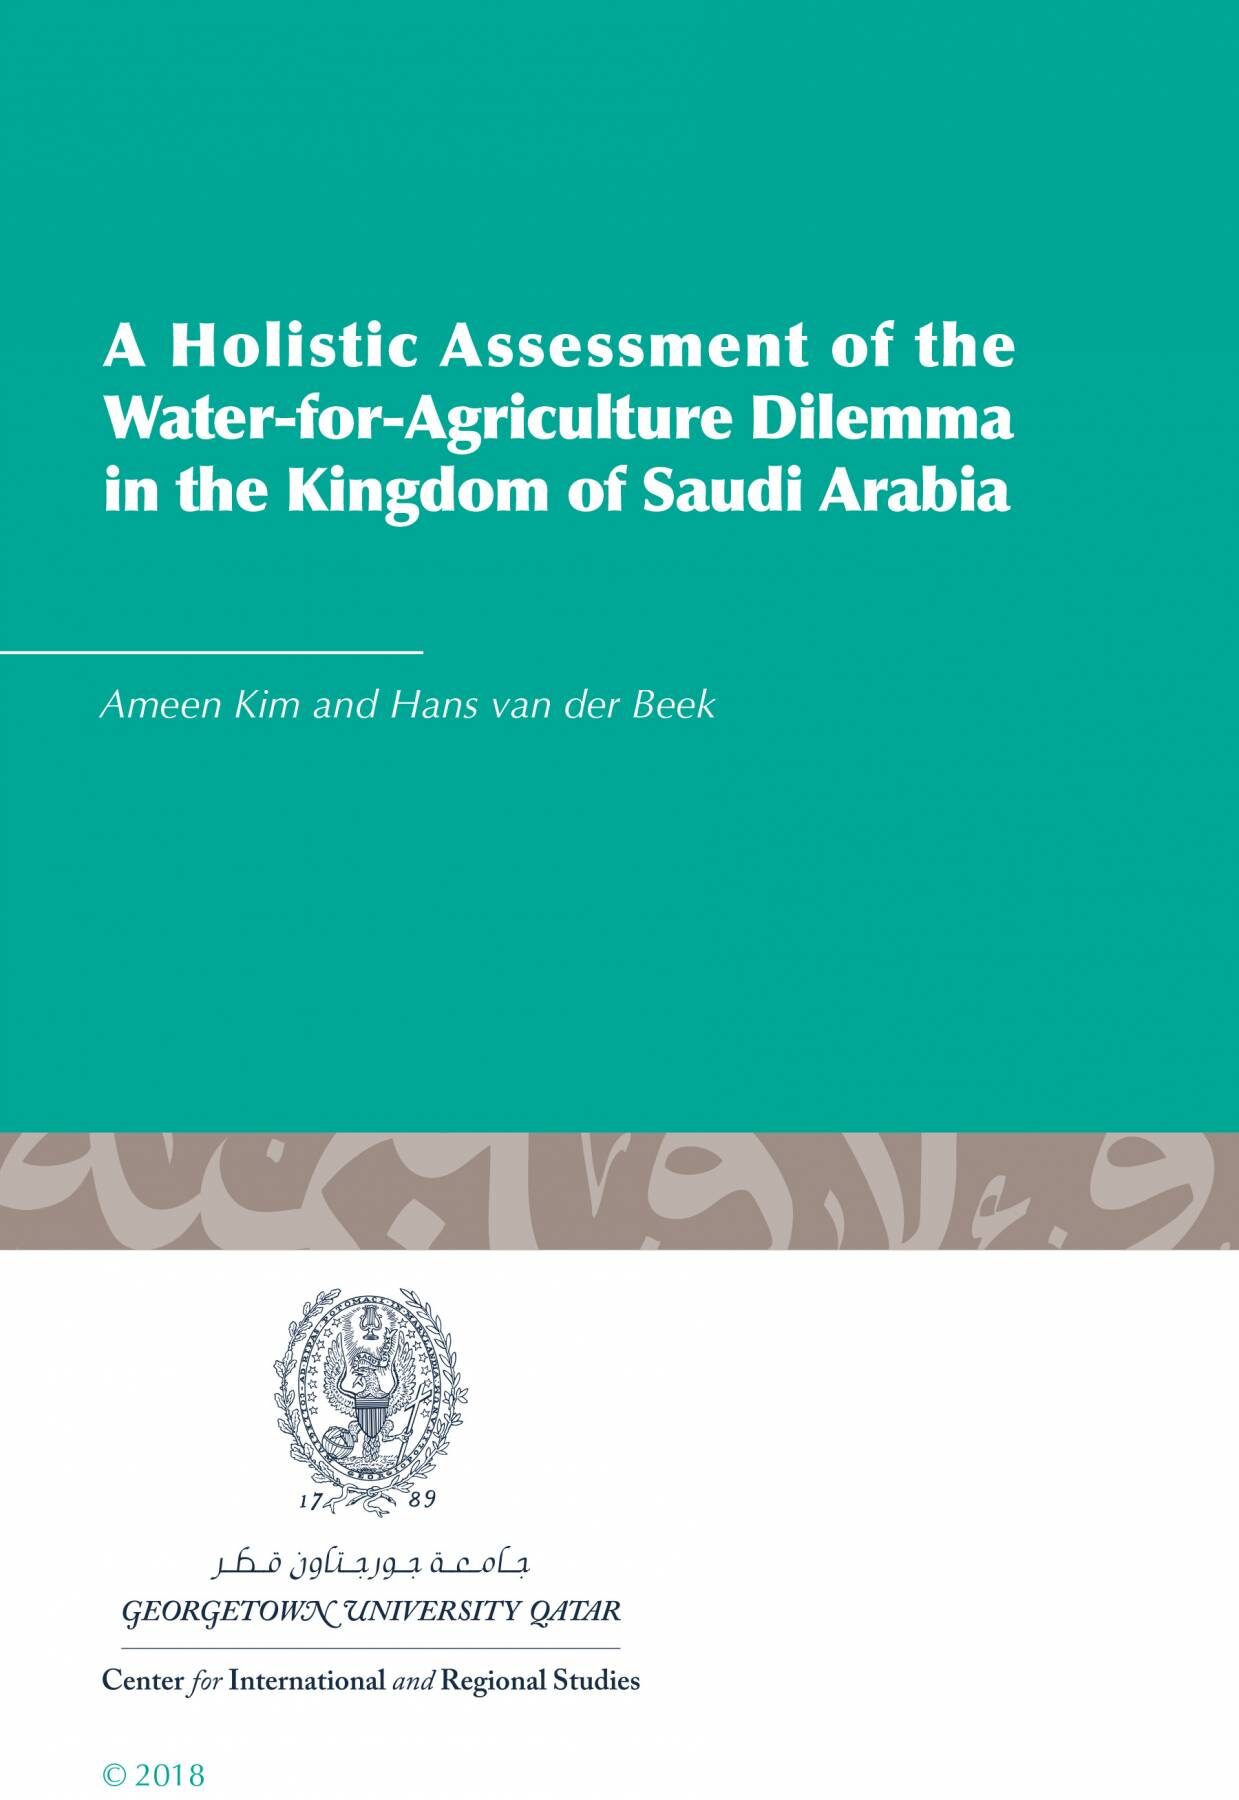 A Holistic Assessment of the Water-for-Agriculture Dilemma in the Kingdom of Saudi Arabia